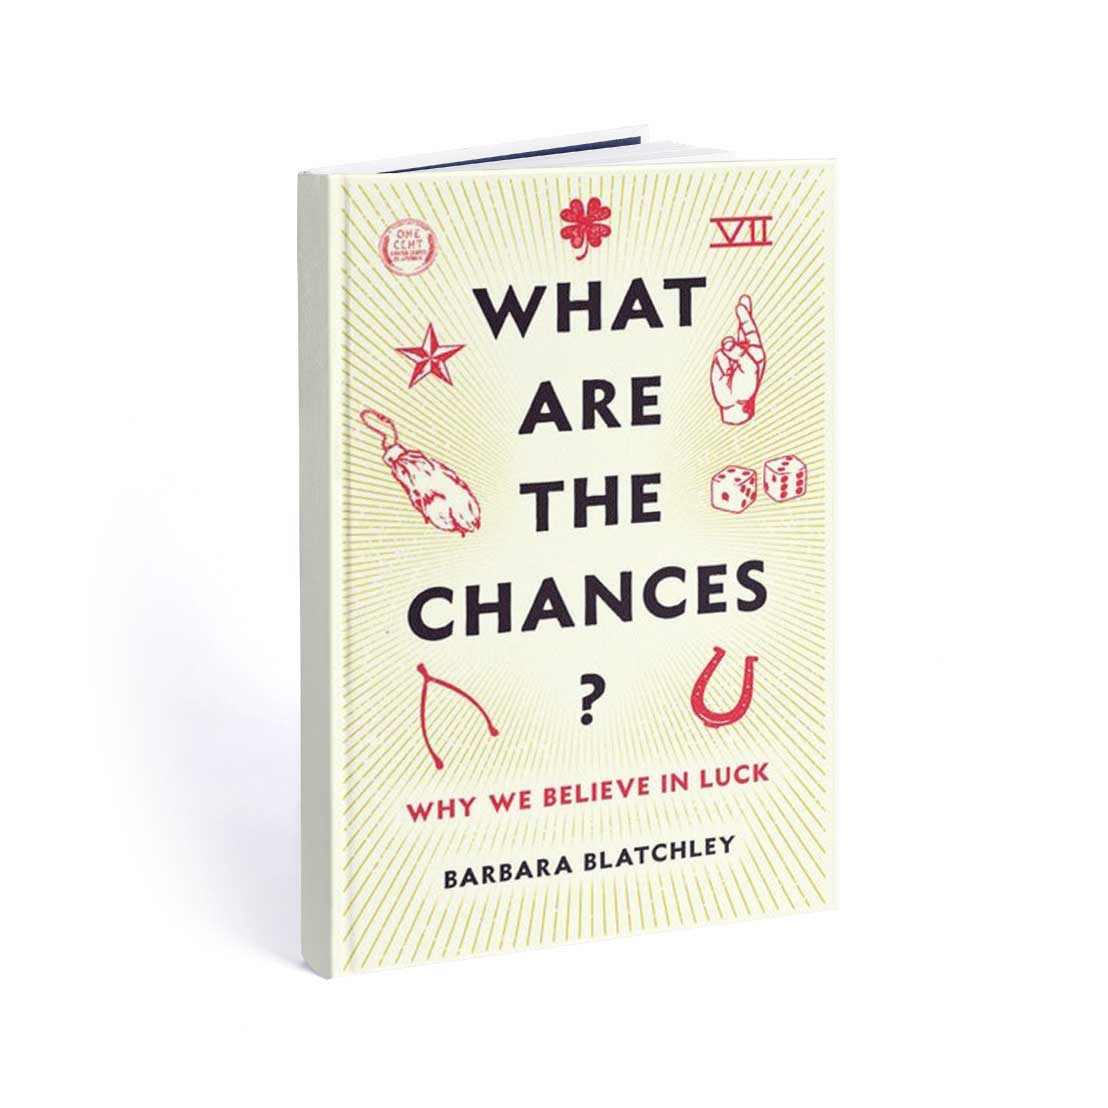 "What are the Chances?" book in white background